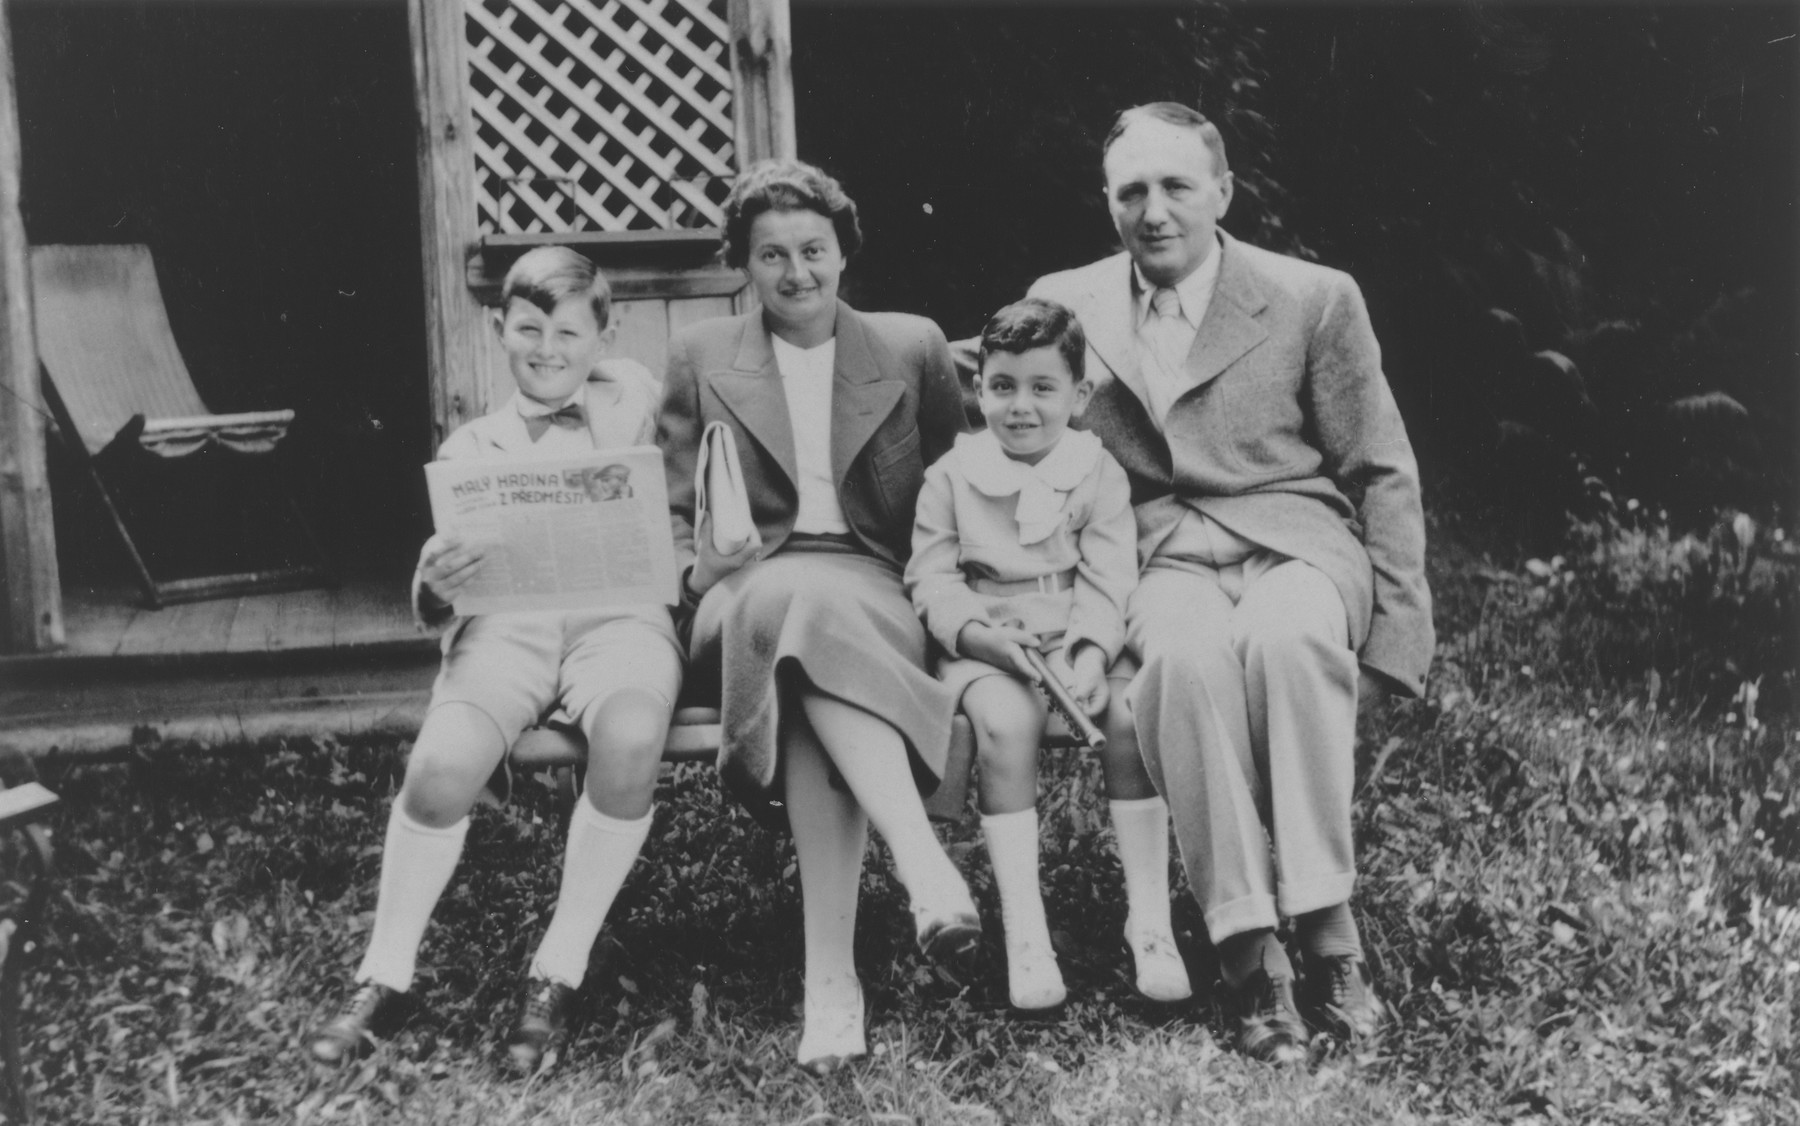 Portrait of the Brod family in Prague.

PIctured from left to right are: Ivan (b.1927), Olga (b.1899), Jan (b.1932) and Karel Brod.  All but Ivan perished in Auschwitz in 1944.